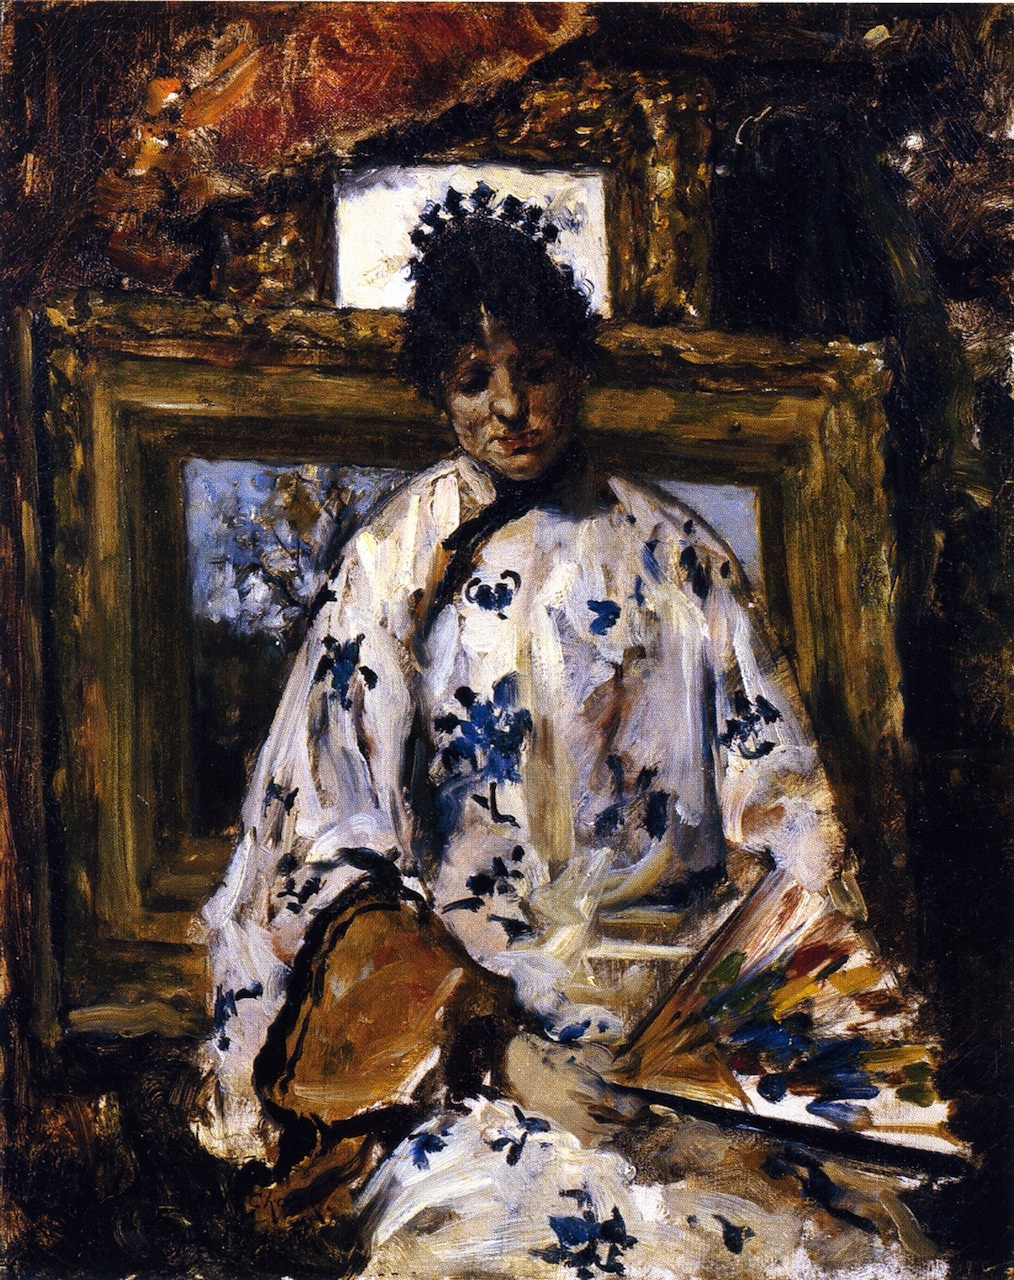 William Merritt Chase. Woman in a Chinese outfit